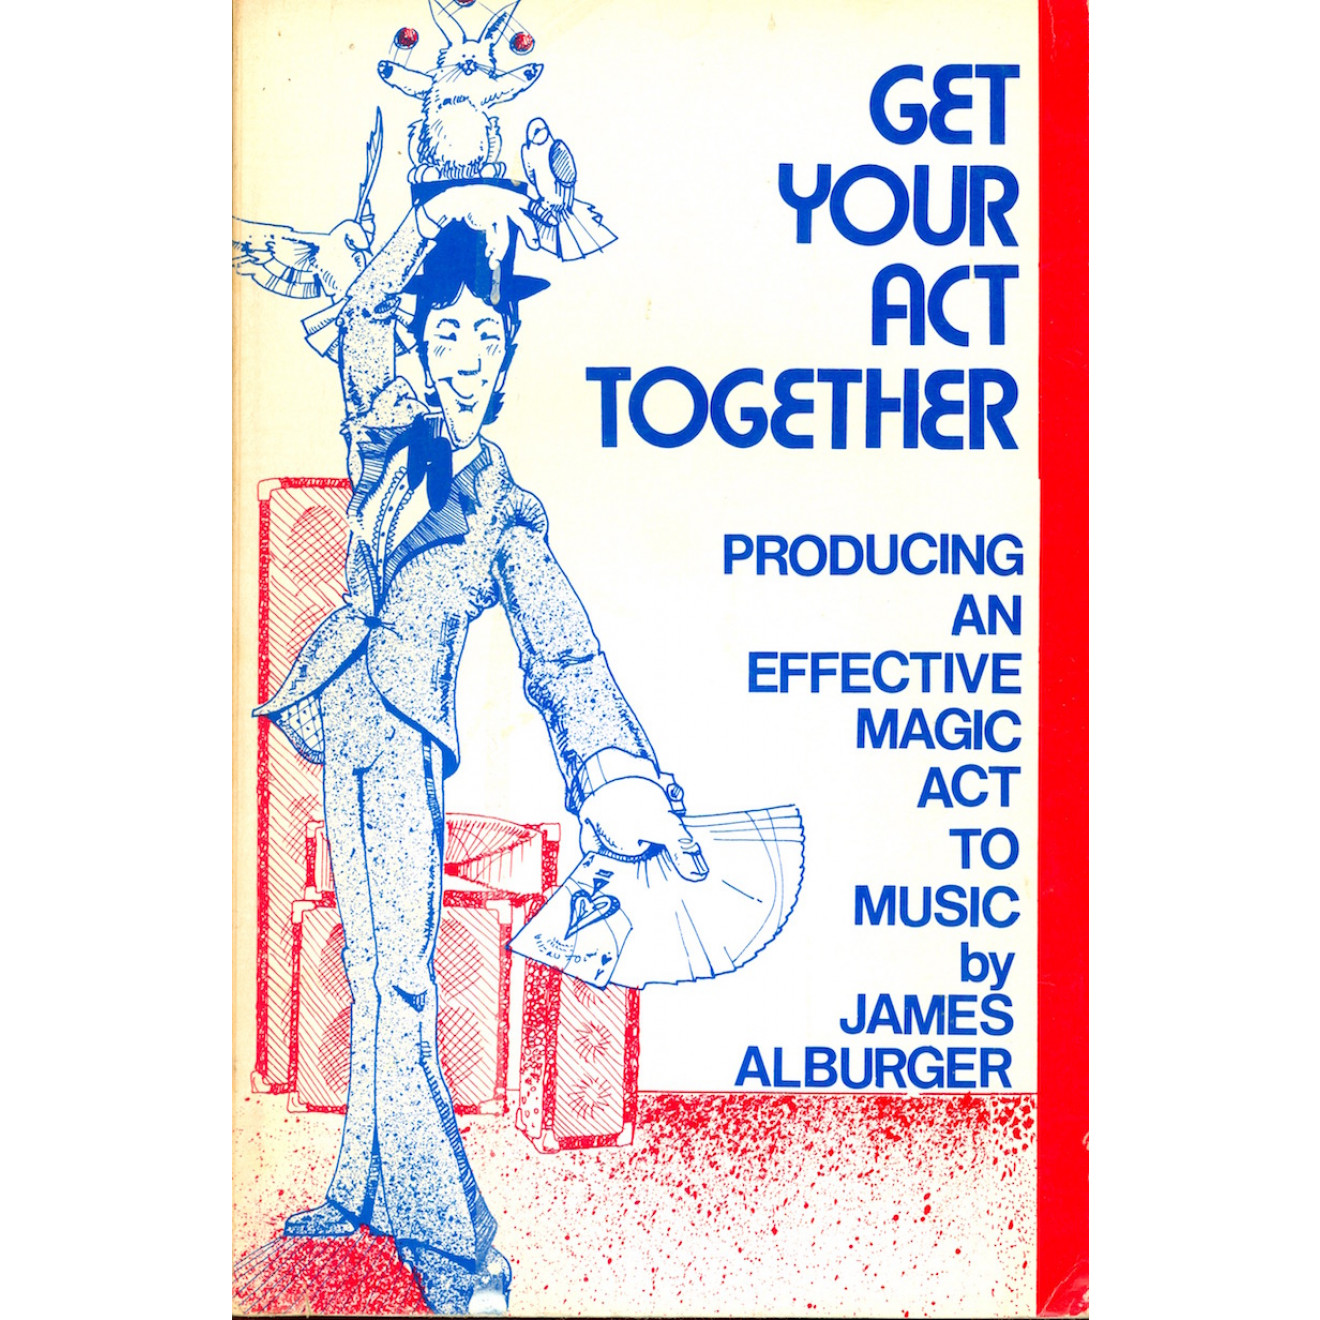 Get Your Act Together (1981)